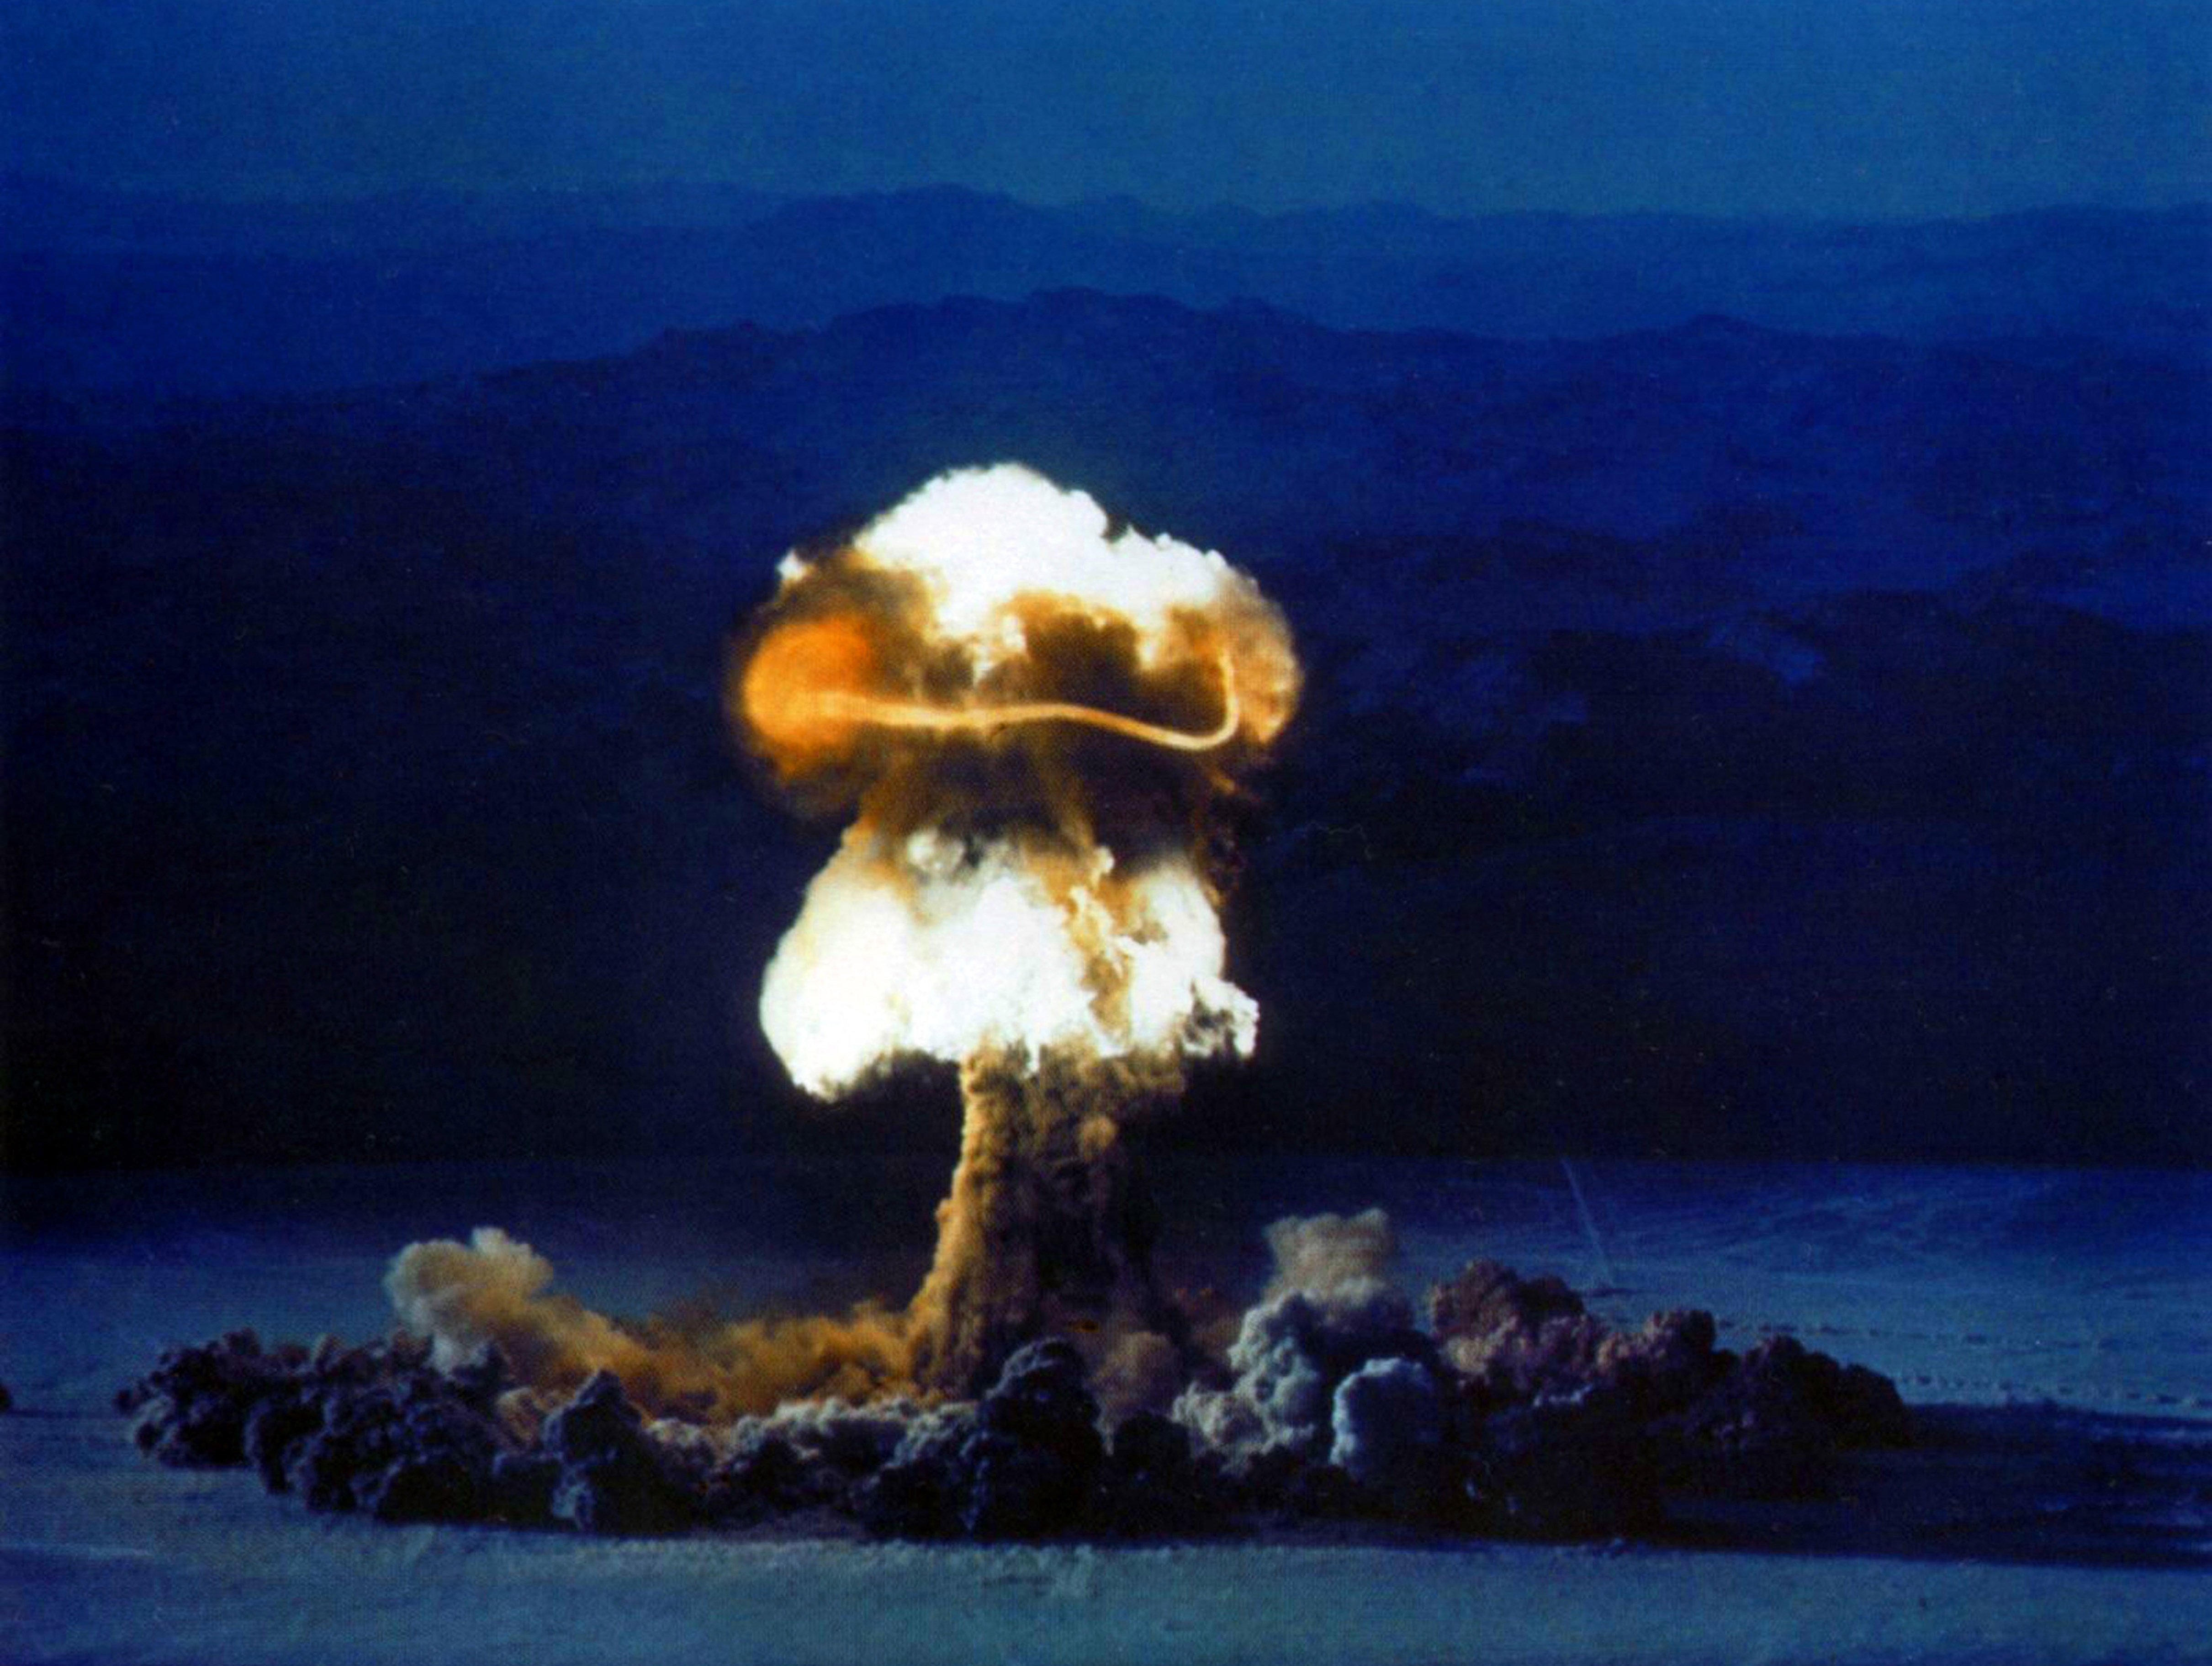 US Nuclear device (bomb) test ‘Priscilla’ 24 June 1957. Test Height and Type: 700 Foot Balloon with a yield of Yield: 37 kt. Weapon Explosion .